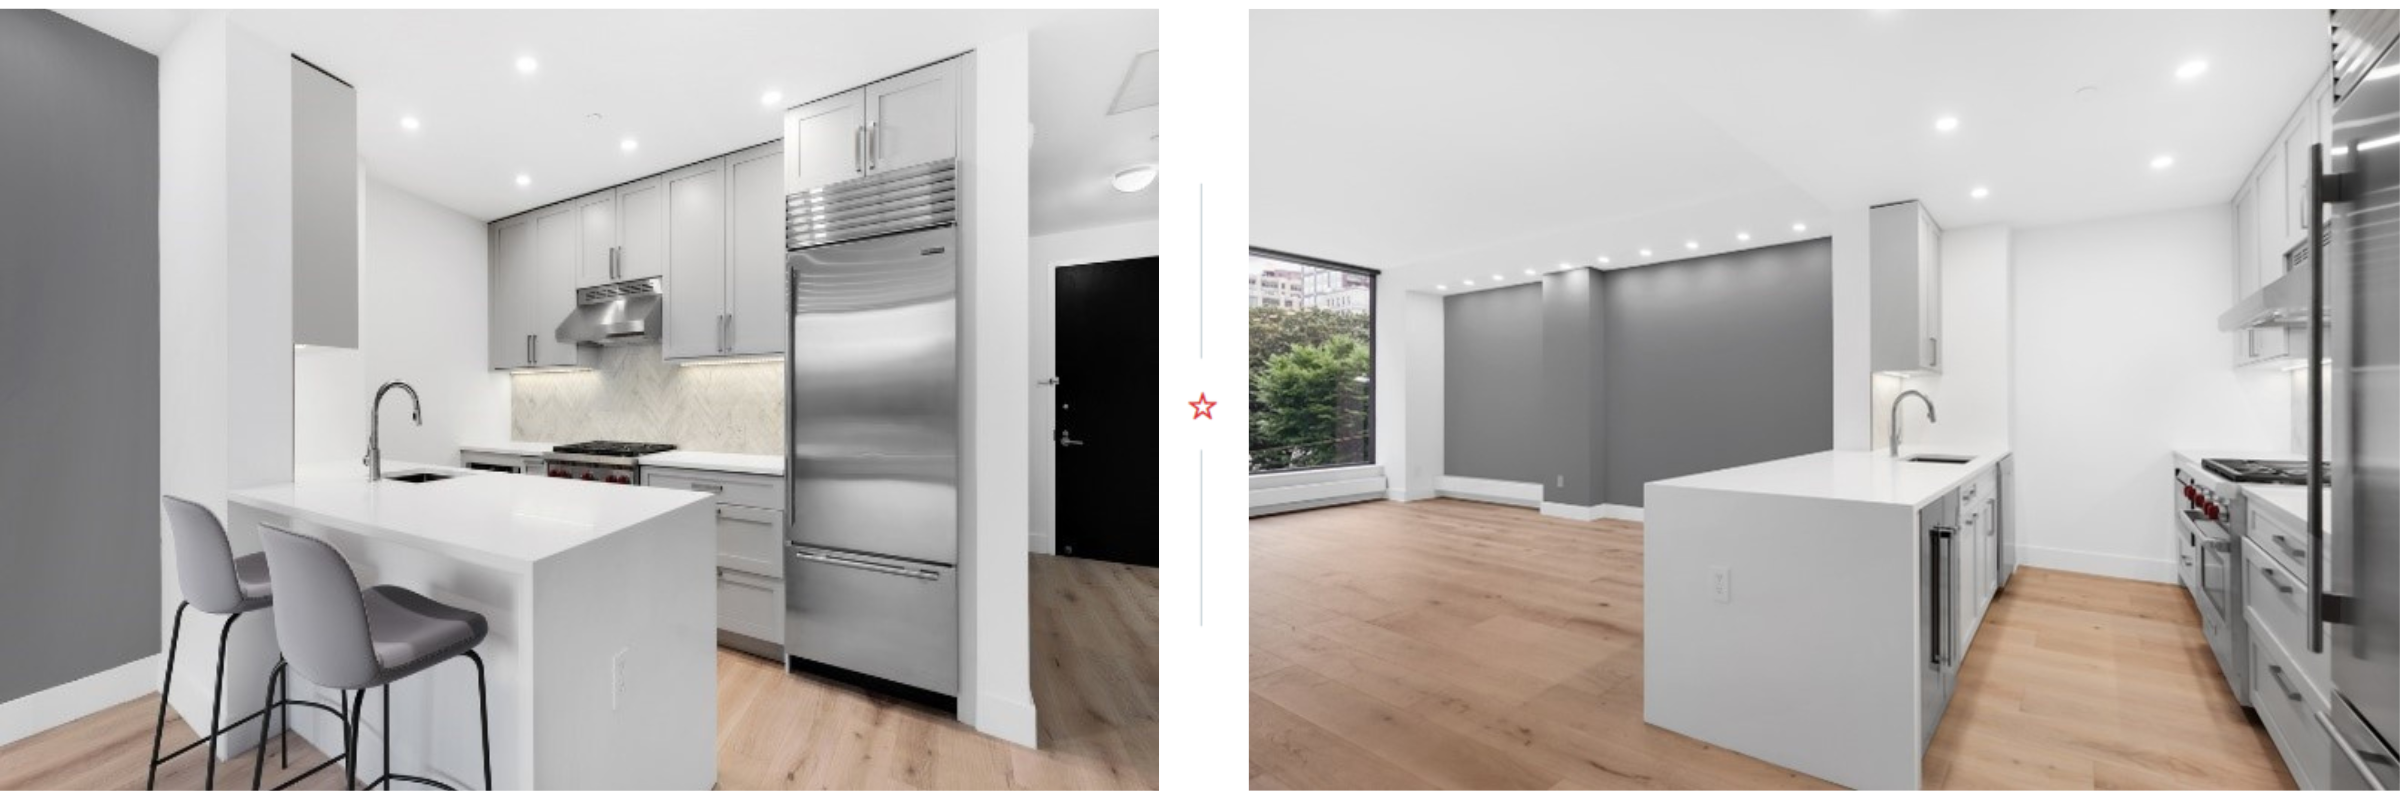 Two pictures of the Greenwich Village kitchen after the remodel. Hardwood floors, stainless steel appliances, large island with light countertops and two stools.